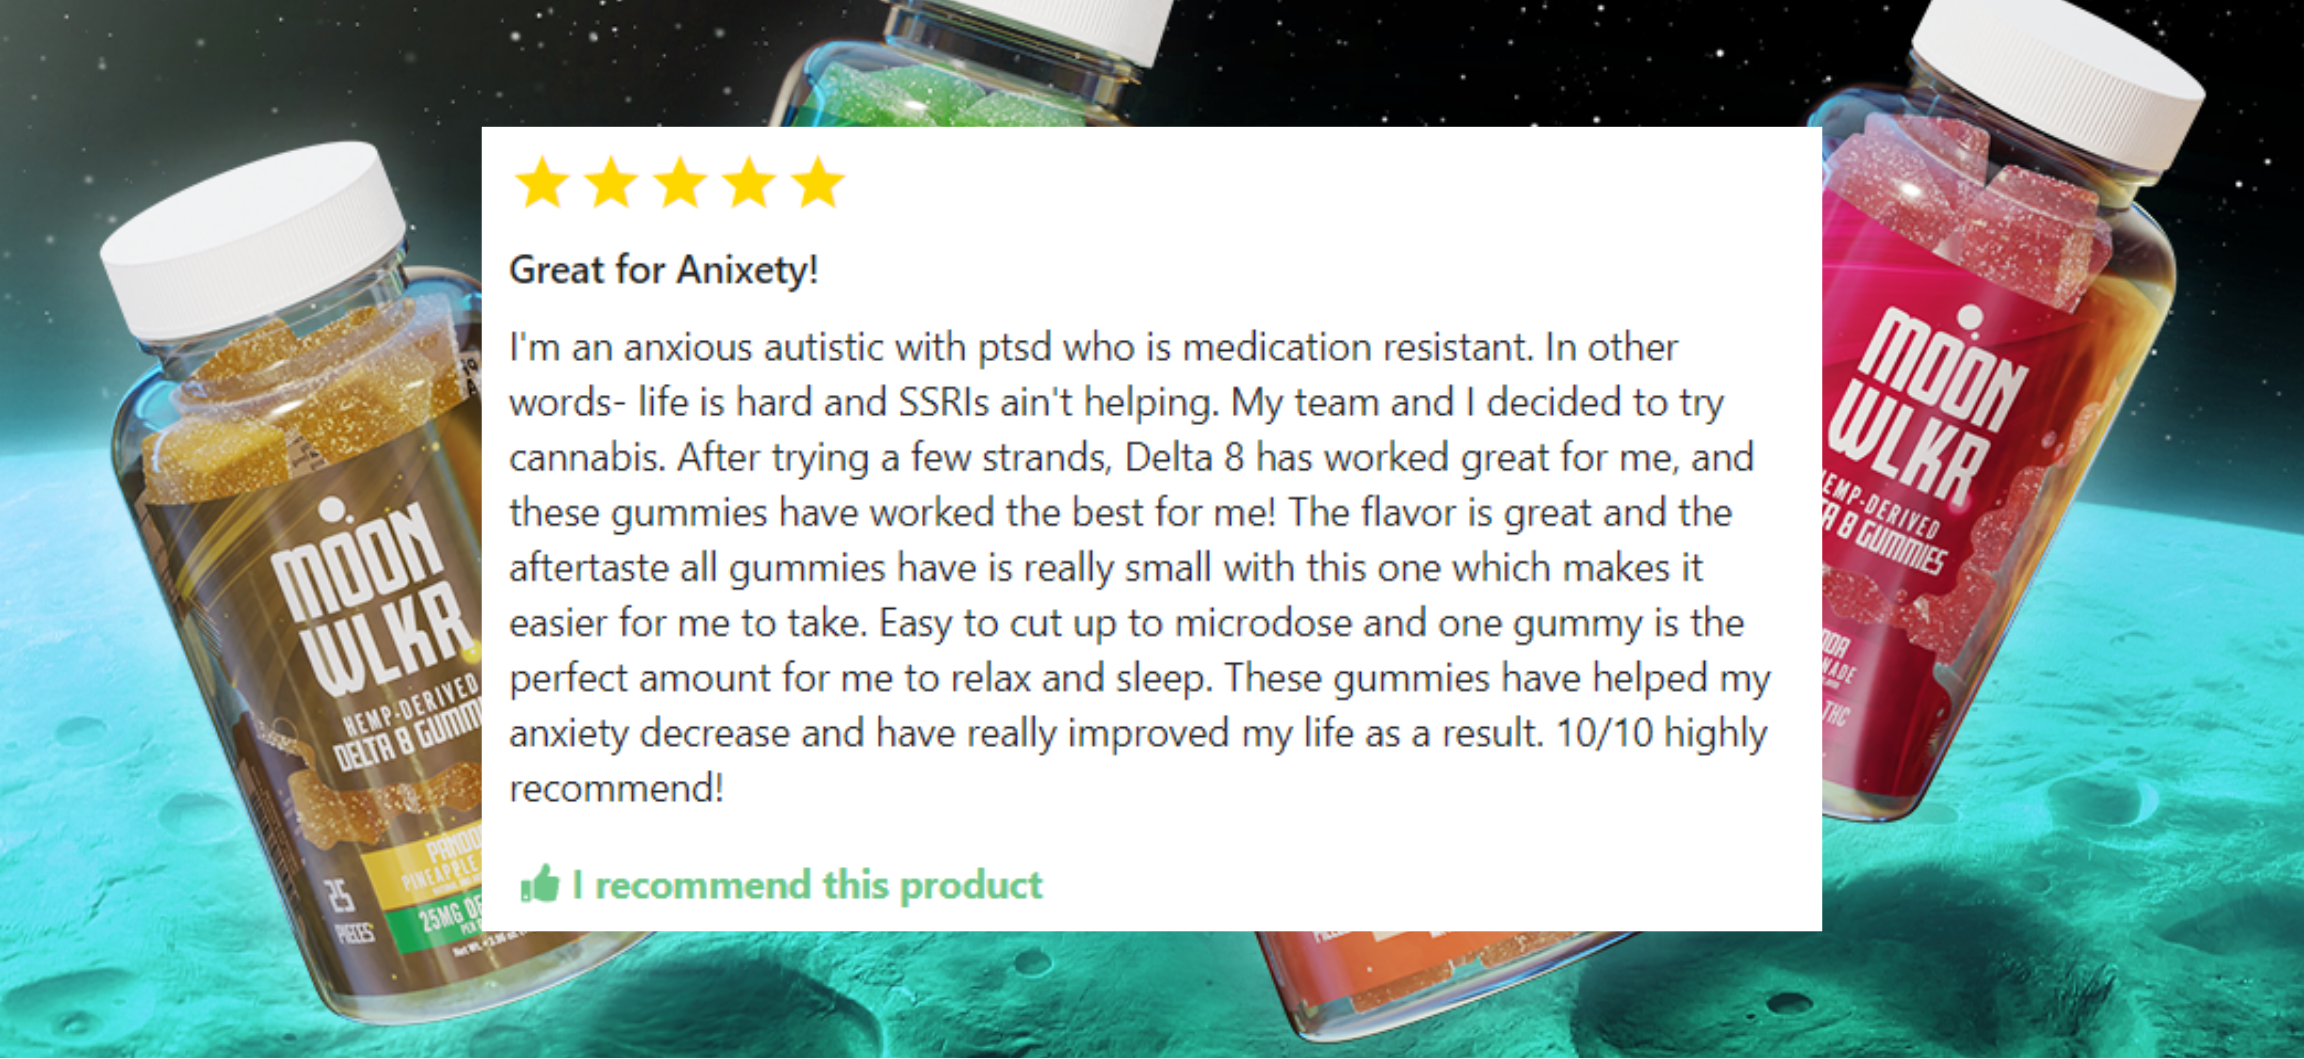 Great for anxiety - 5 star Delta 8 gummies review about microdosing